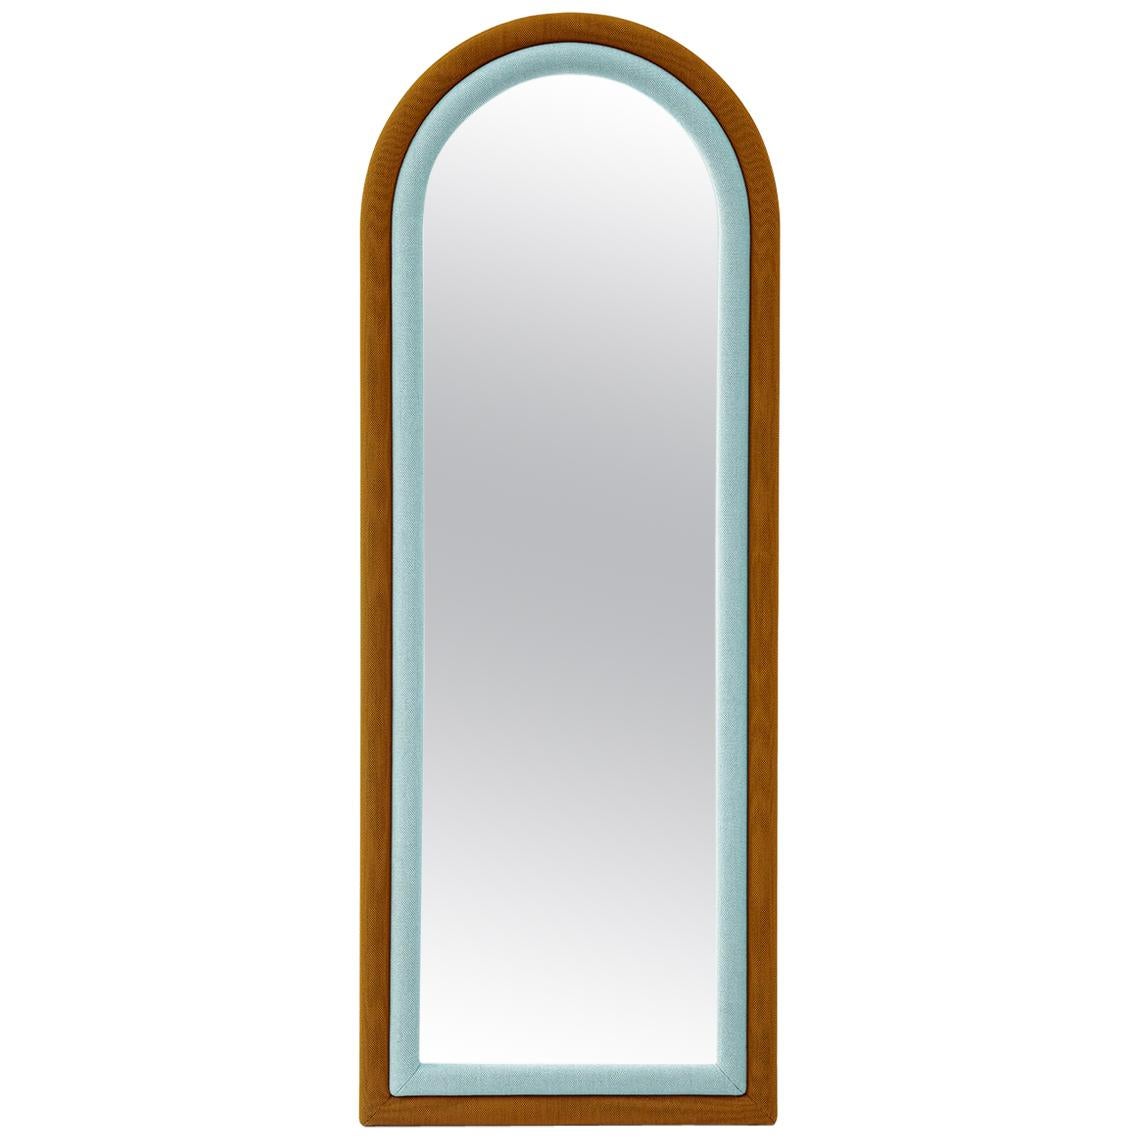 Contemporary Upholstered Iris Floor Mirror, Blue and Copper